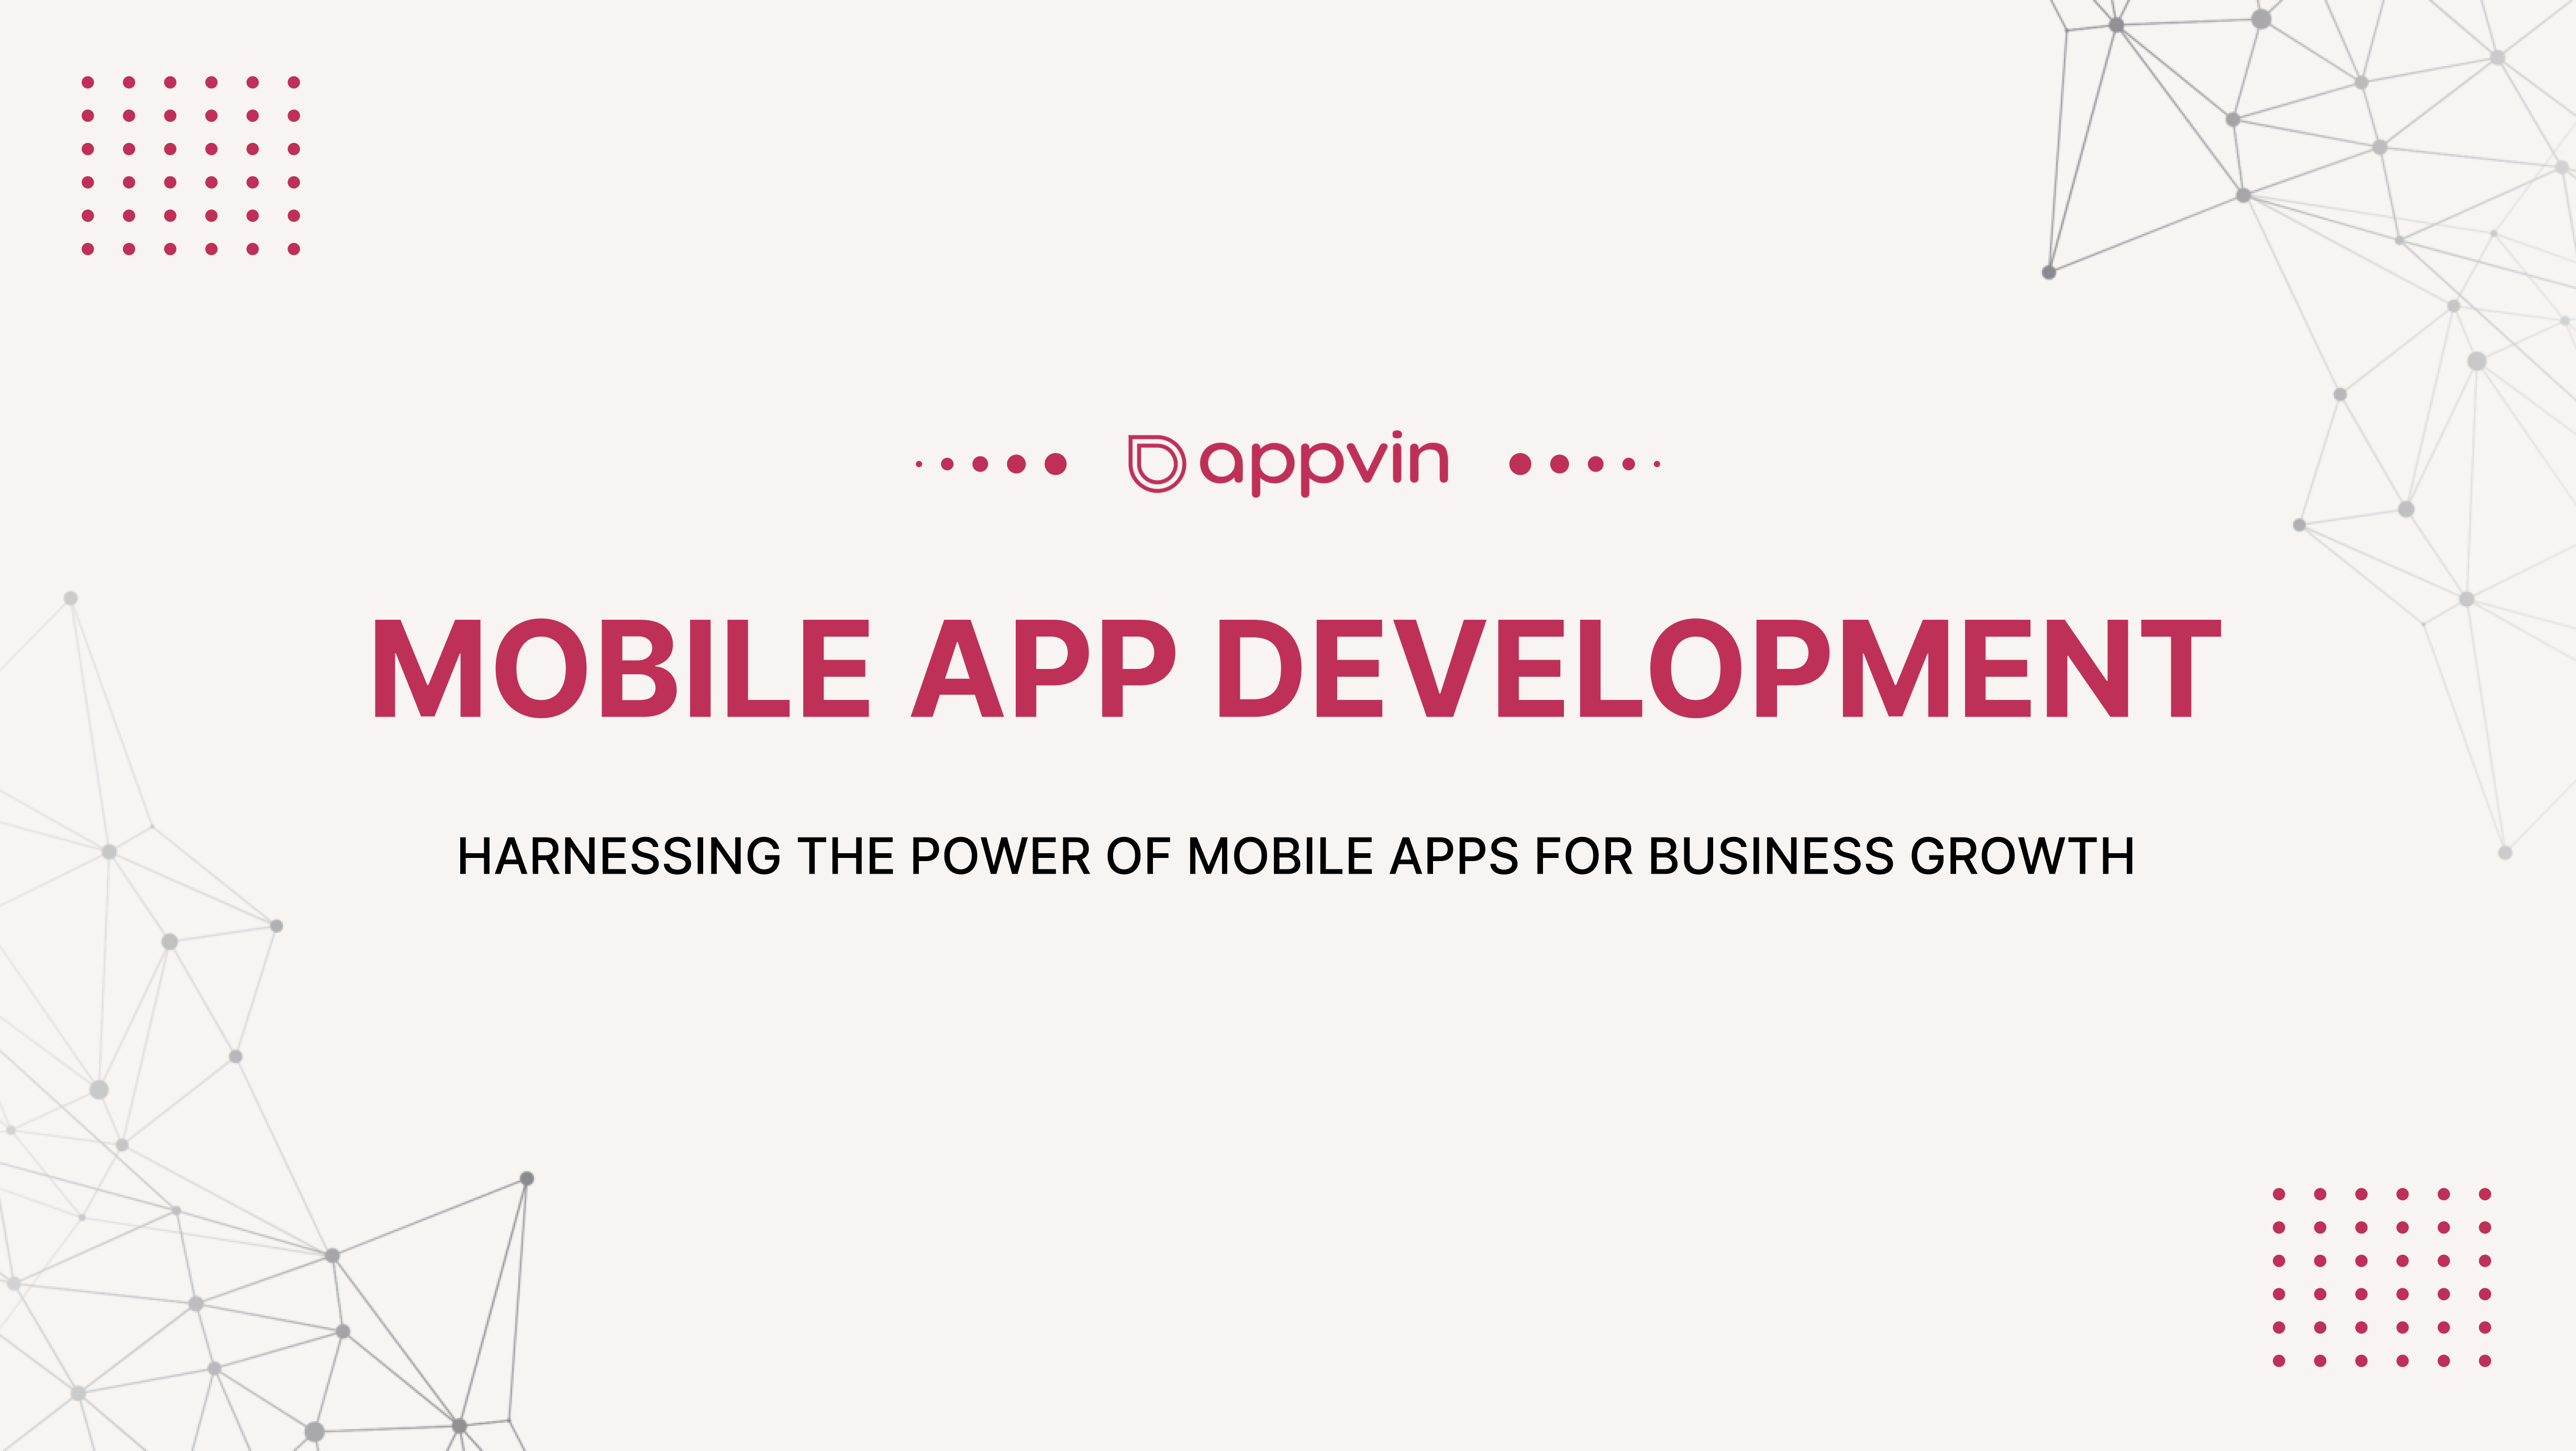 Harnessing the Power of Mobile Apps for Business Growth - AppVin Technologies